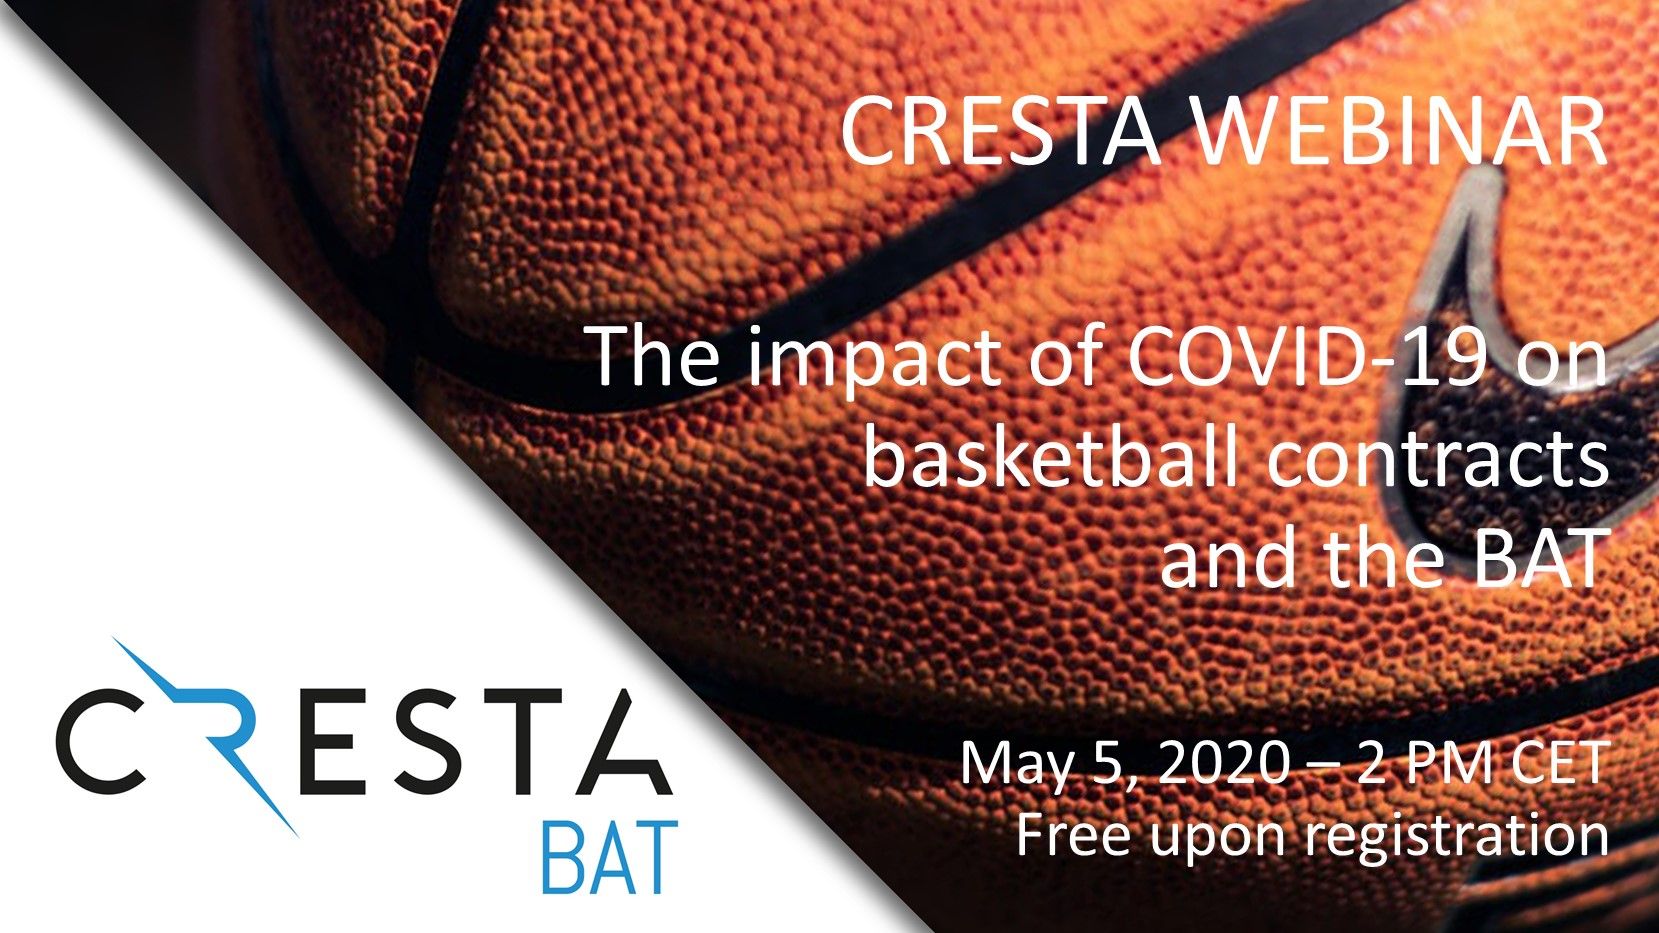 CRESTA webinar on the impact of COVID-19 on basketball contracts and arbitration with the BAT